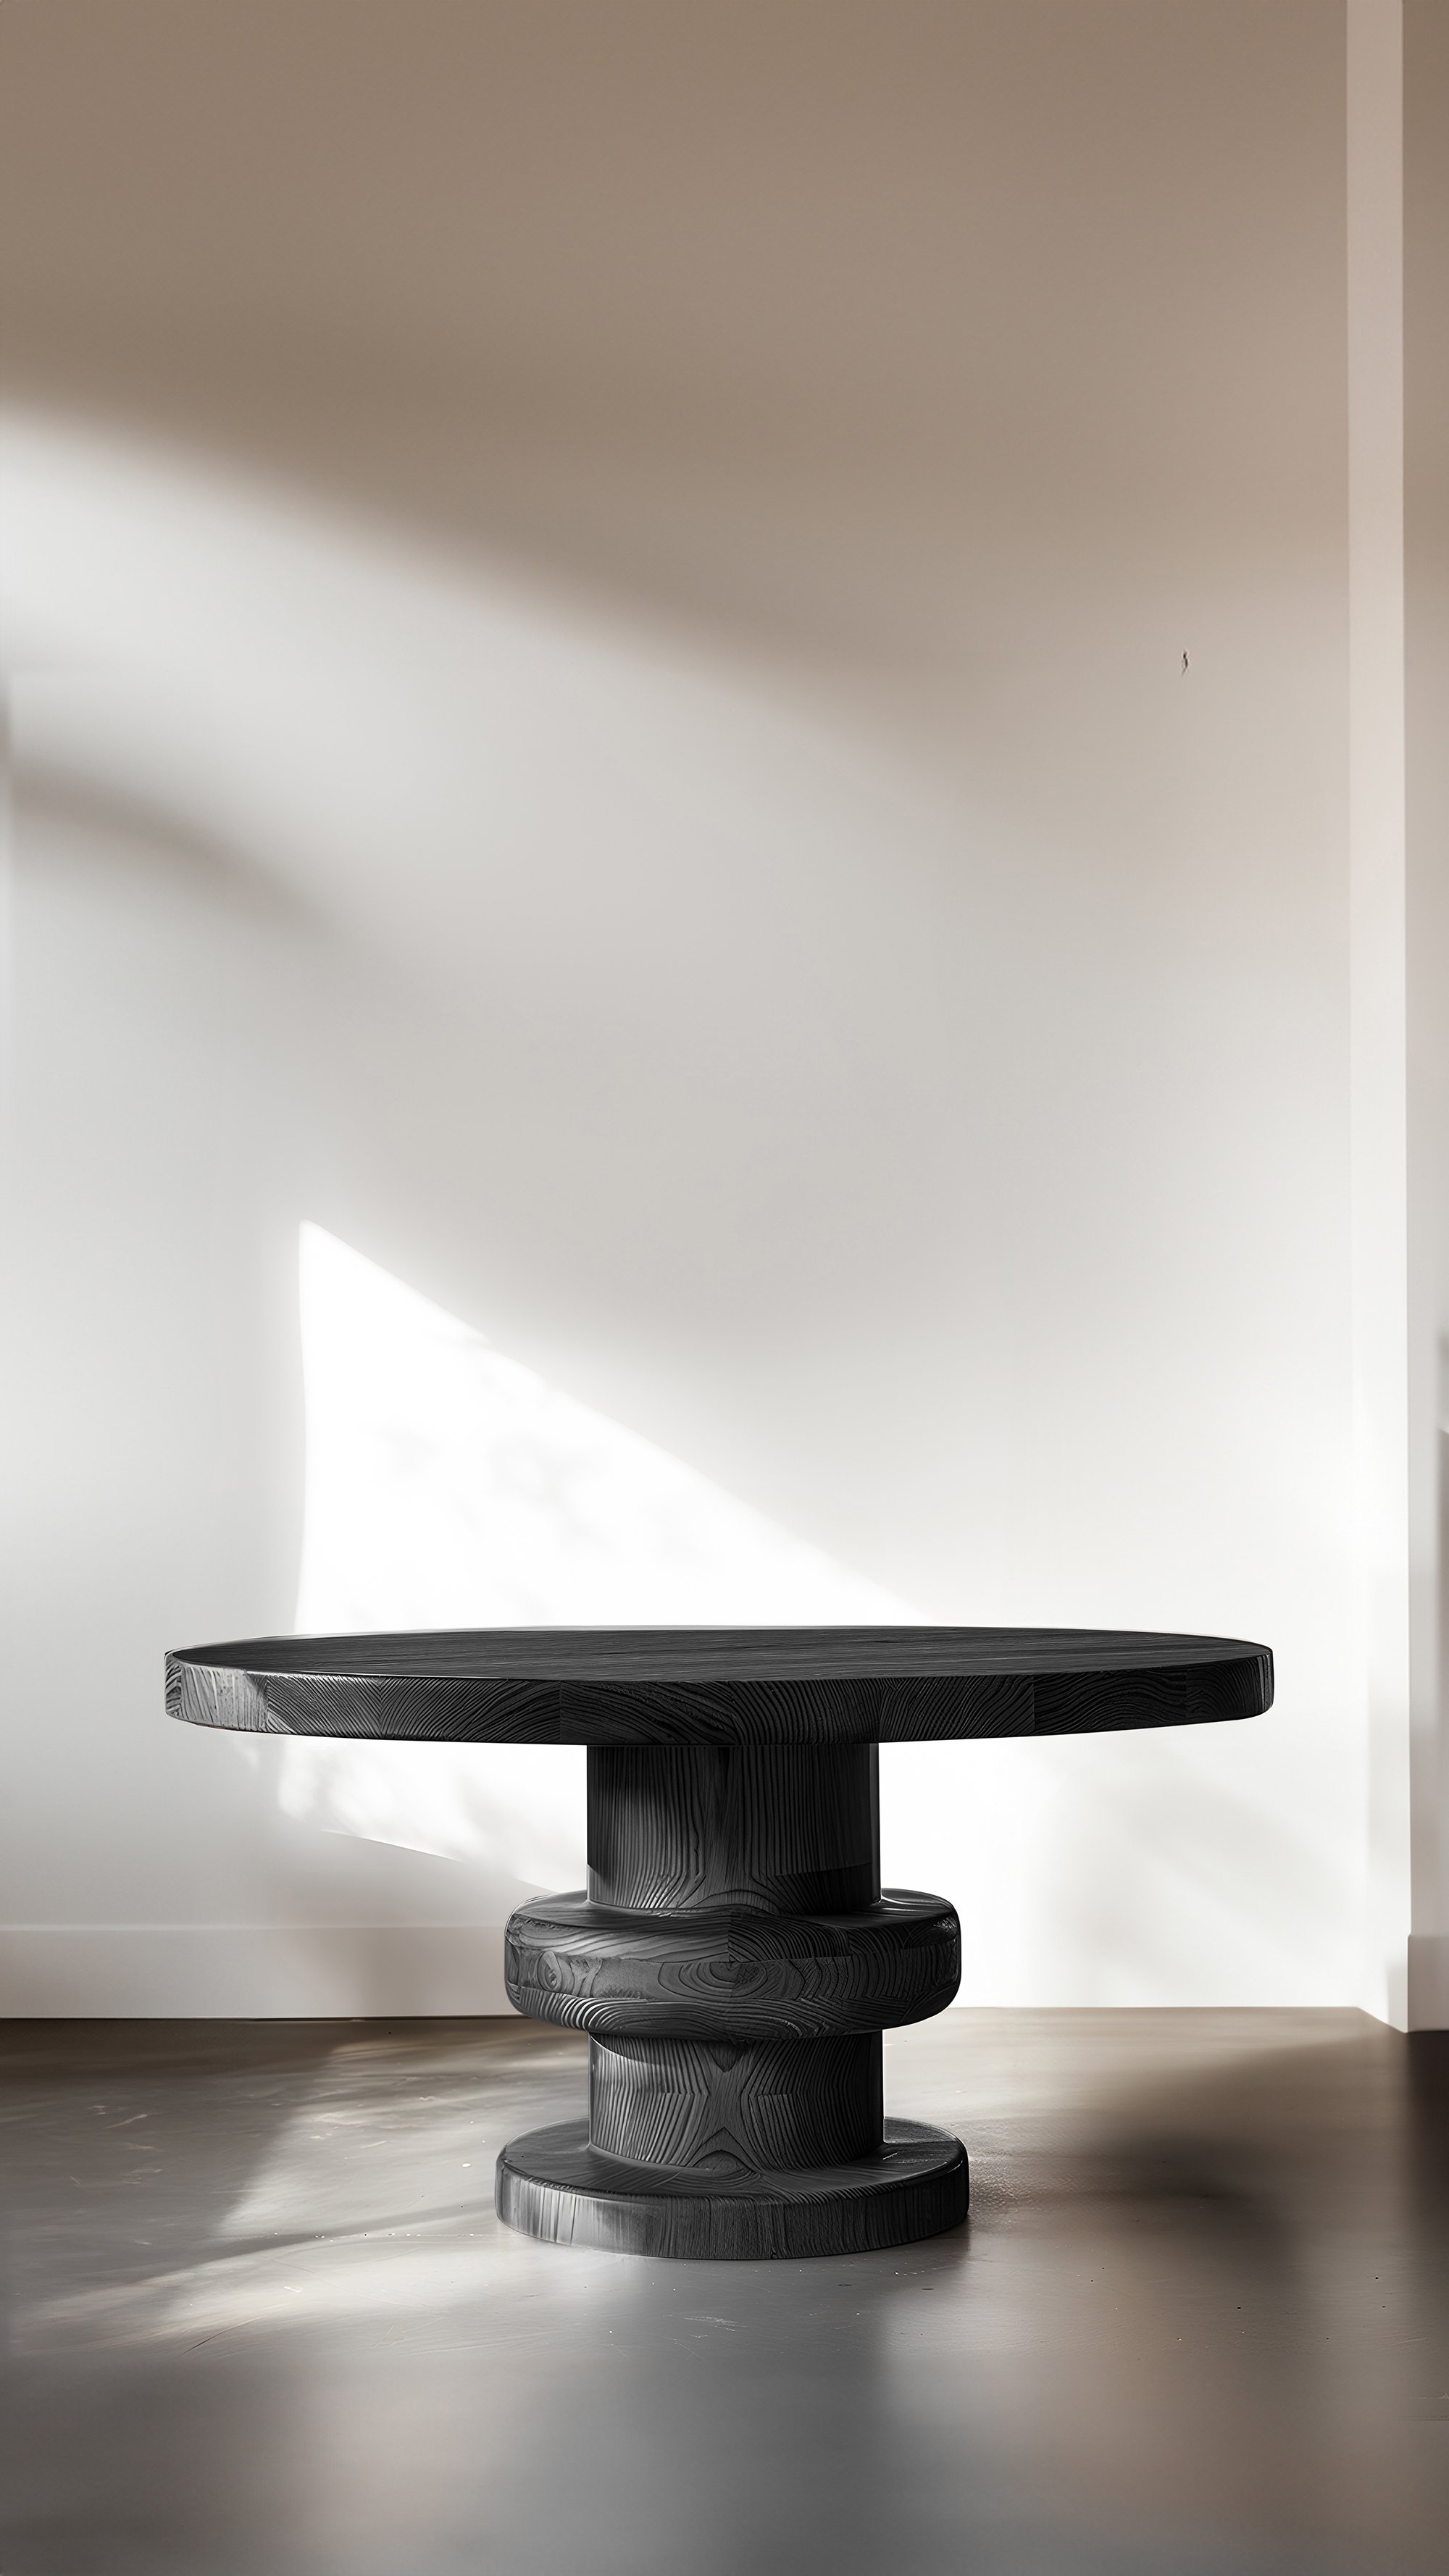 Dining Elegance No06, Socle Dining Room Tables in Black Wood, Crafted by NONO - 5.jpg